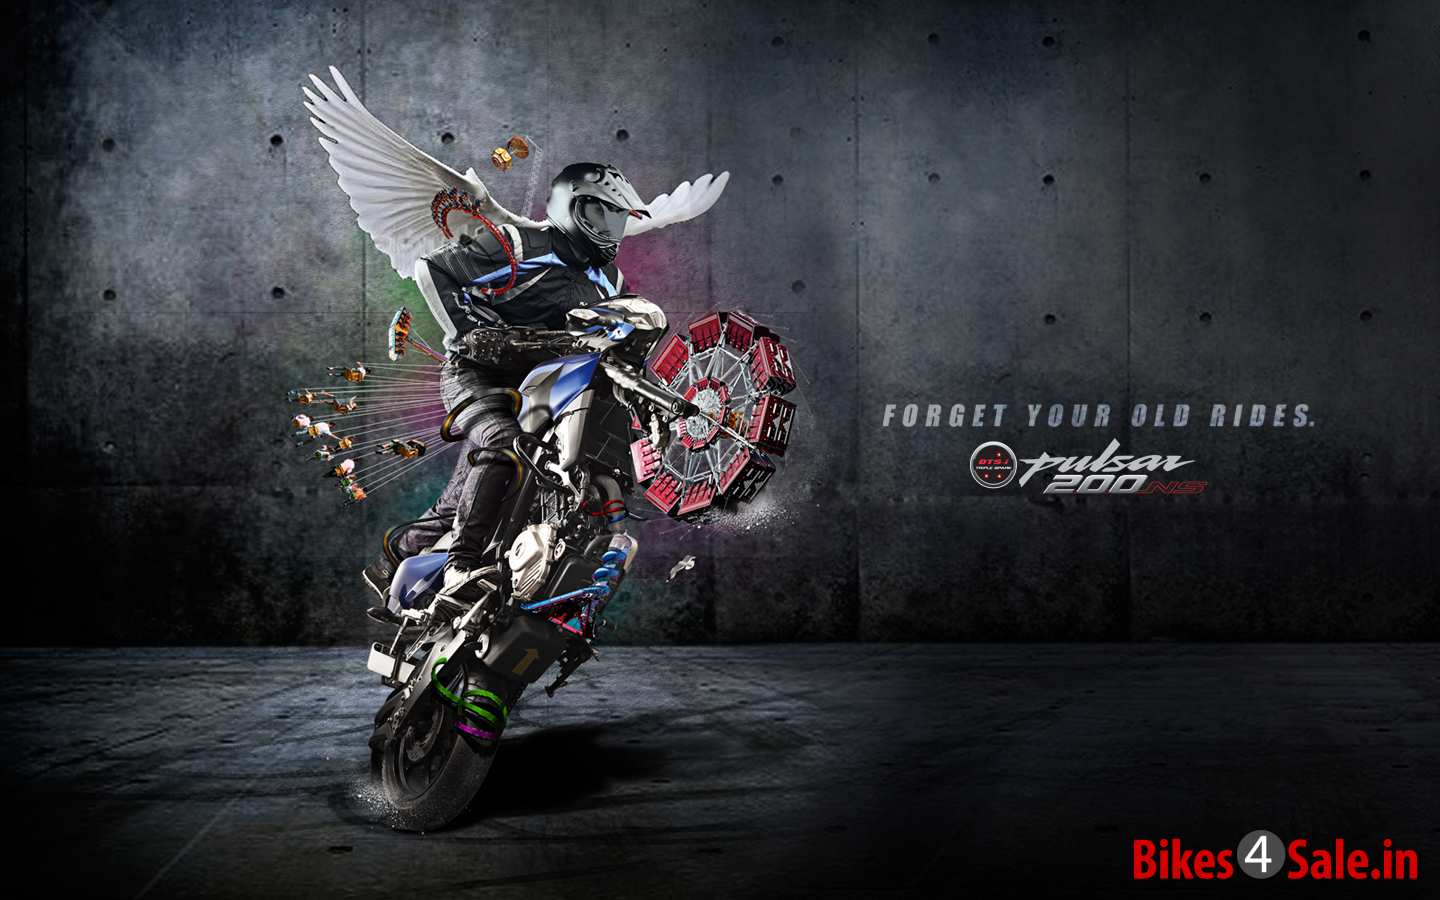 Bajaj Pulsar 200 NS - Picture showing the stunning shoots of Pulsar 200 NS